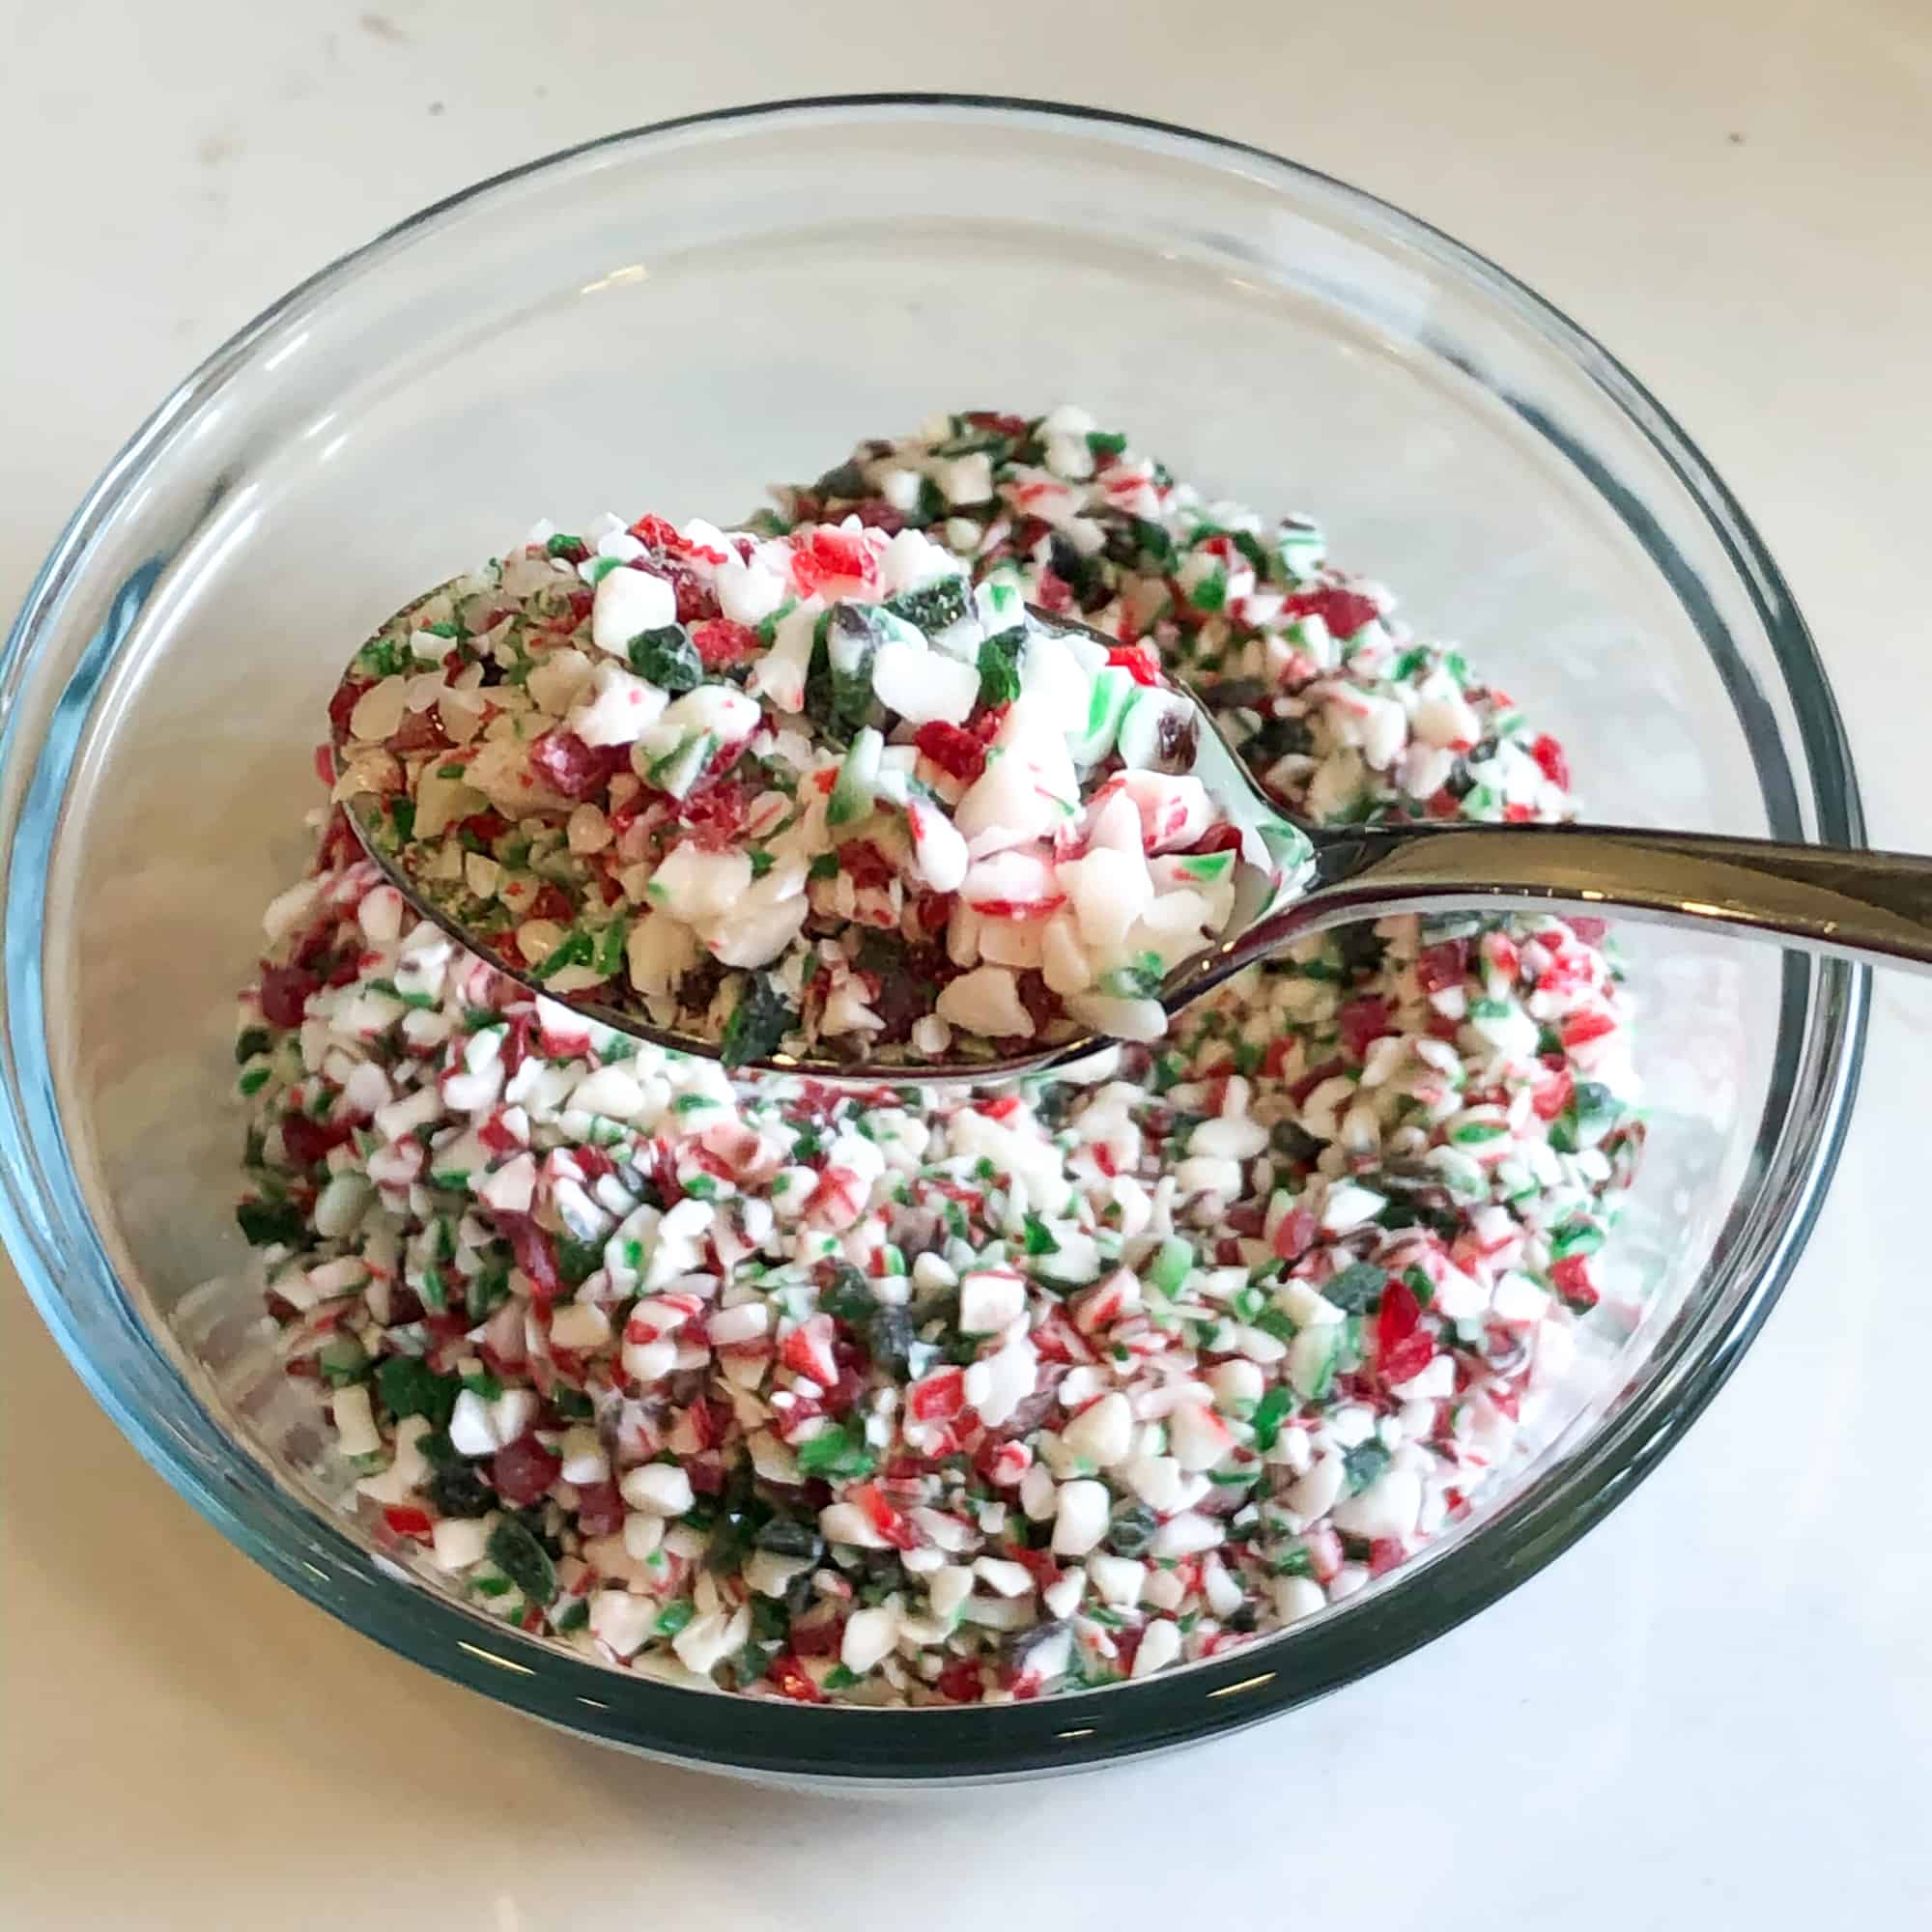 A bowl of crushed candy canes